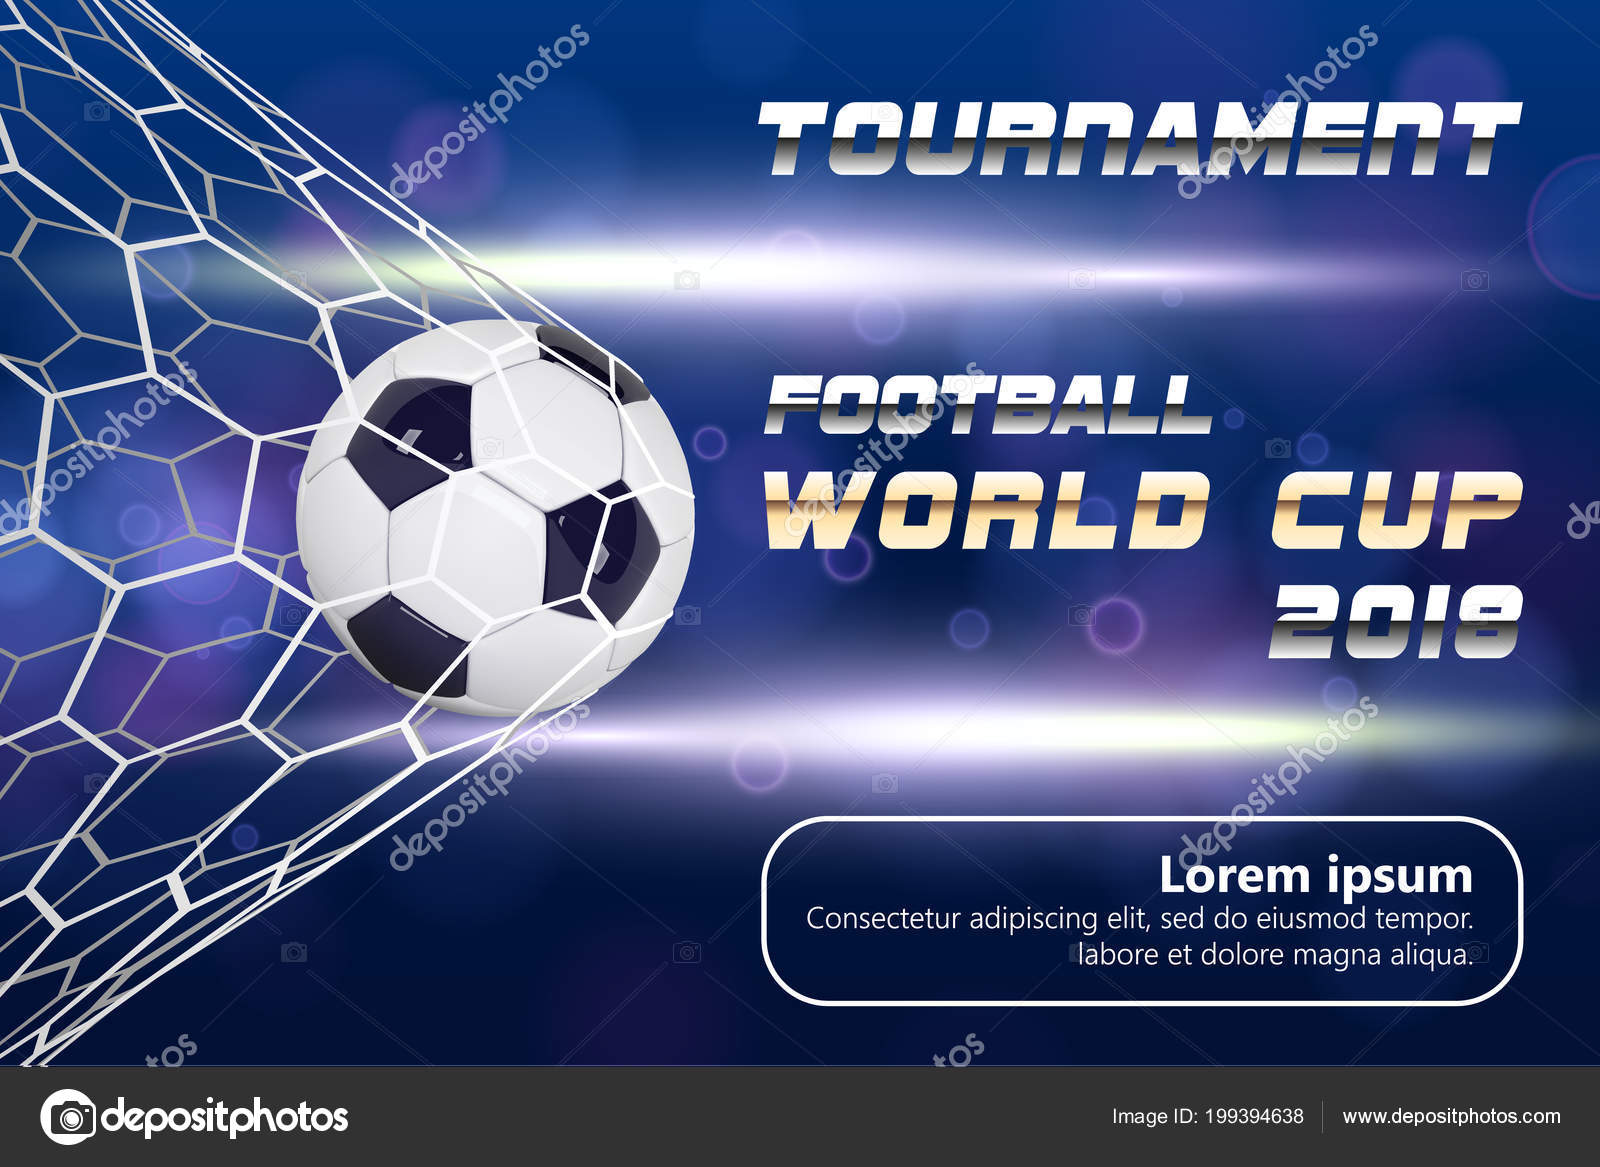 Soccer Or Football Banner With 3d Ball On Blue Background Soccer Game Match Goal Moment With Ball In The Net And Place For Text Vector Image By C Volmon Tut By Vector